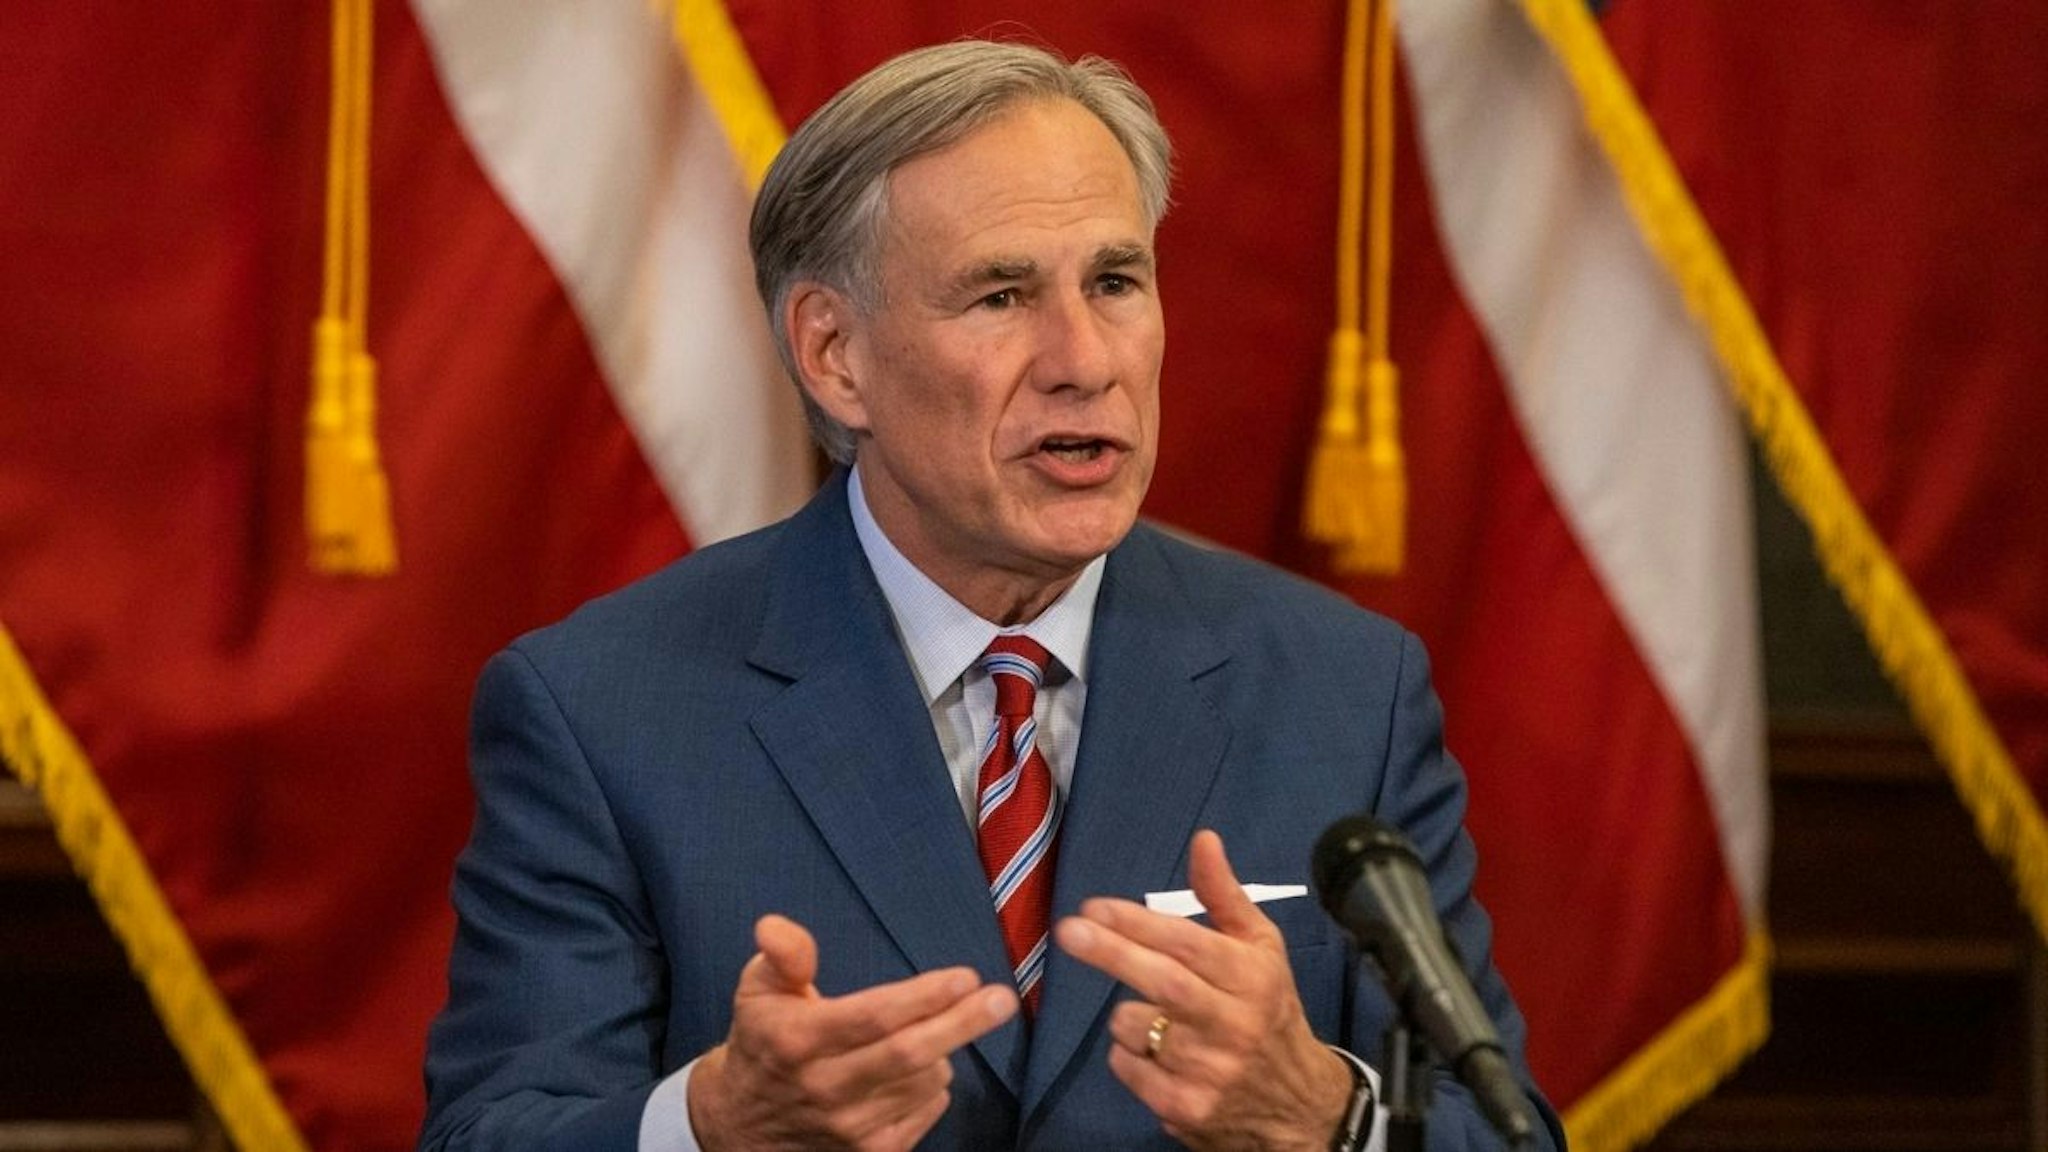 Texas Governor Greg Abbott announces the reopening of more Texas businesses during the COVID-19 pandemic at a press conference at the Texas State Capitol on May 18, 2020 in Austin, Texas.